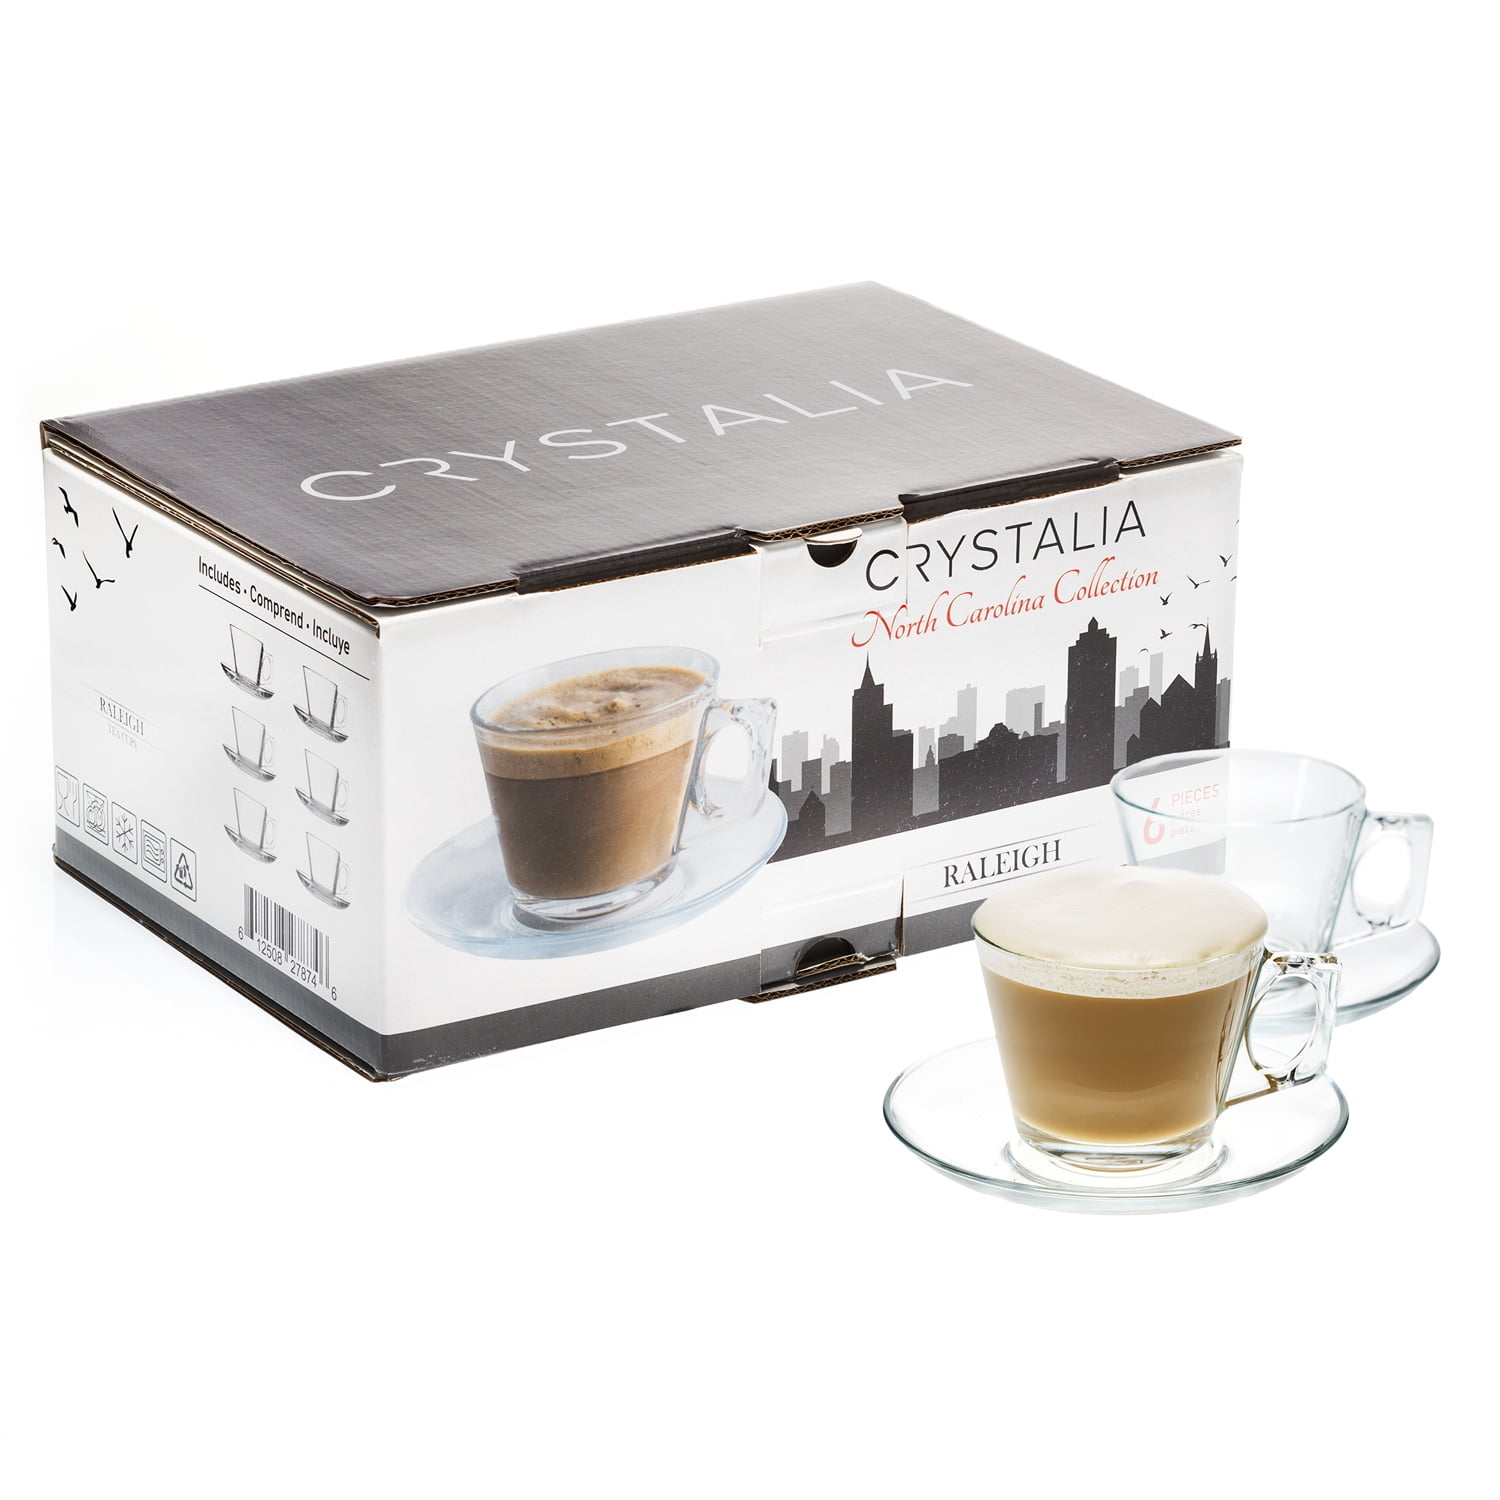  CRYSTALIA Glass Coffee Mugs, Iced Coffee Cup with Handles,  Clear Coffee Mug Set of 6 for Hot Beverages and Cold Drinks, Perfect for  Tea, Latte, Espresso, Cortado, Cappuccino, Hot Chocolate, 10